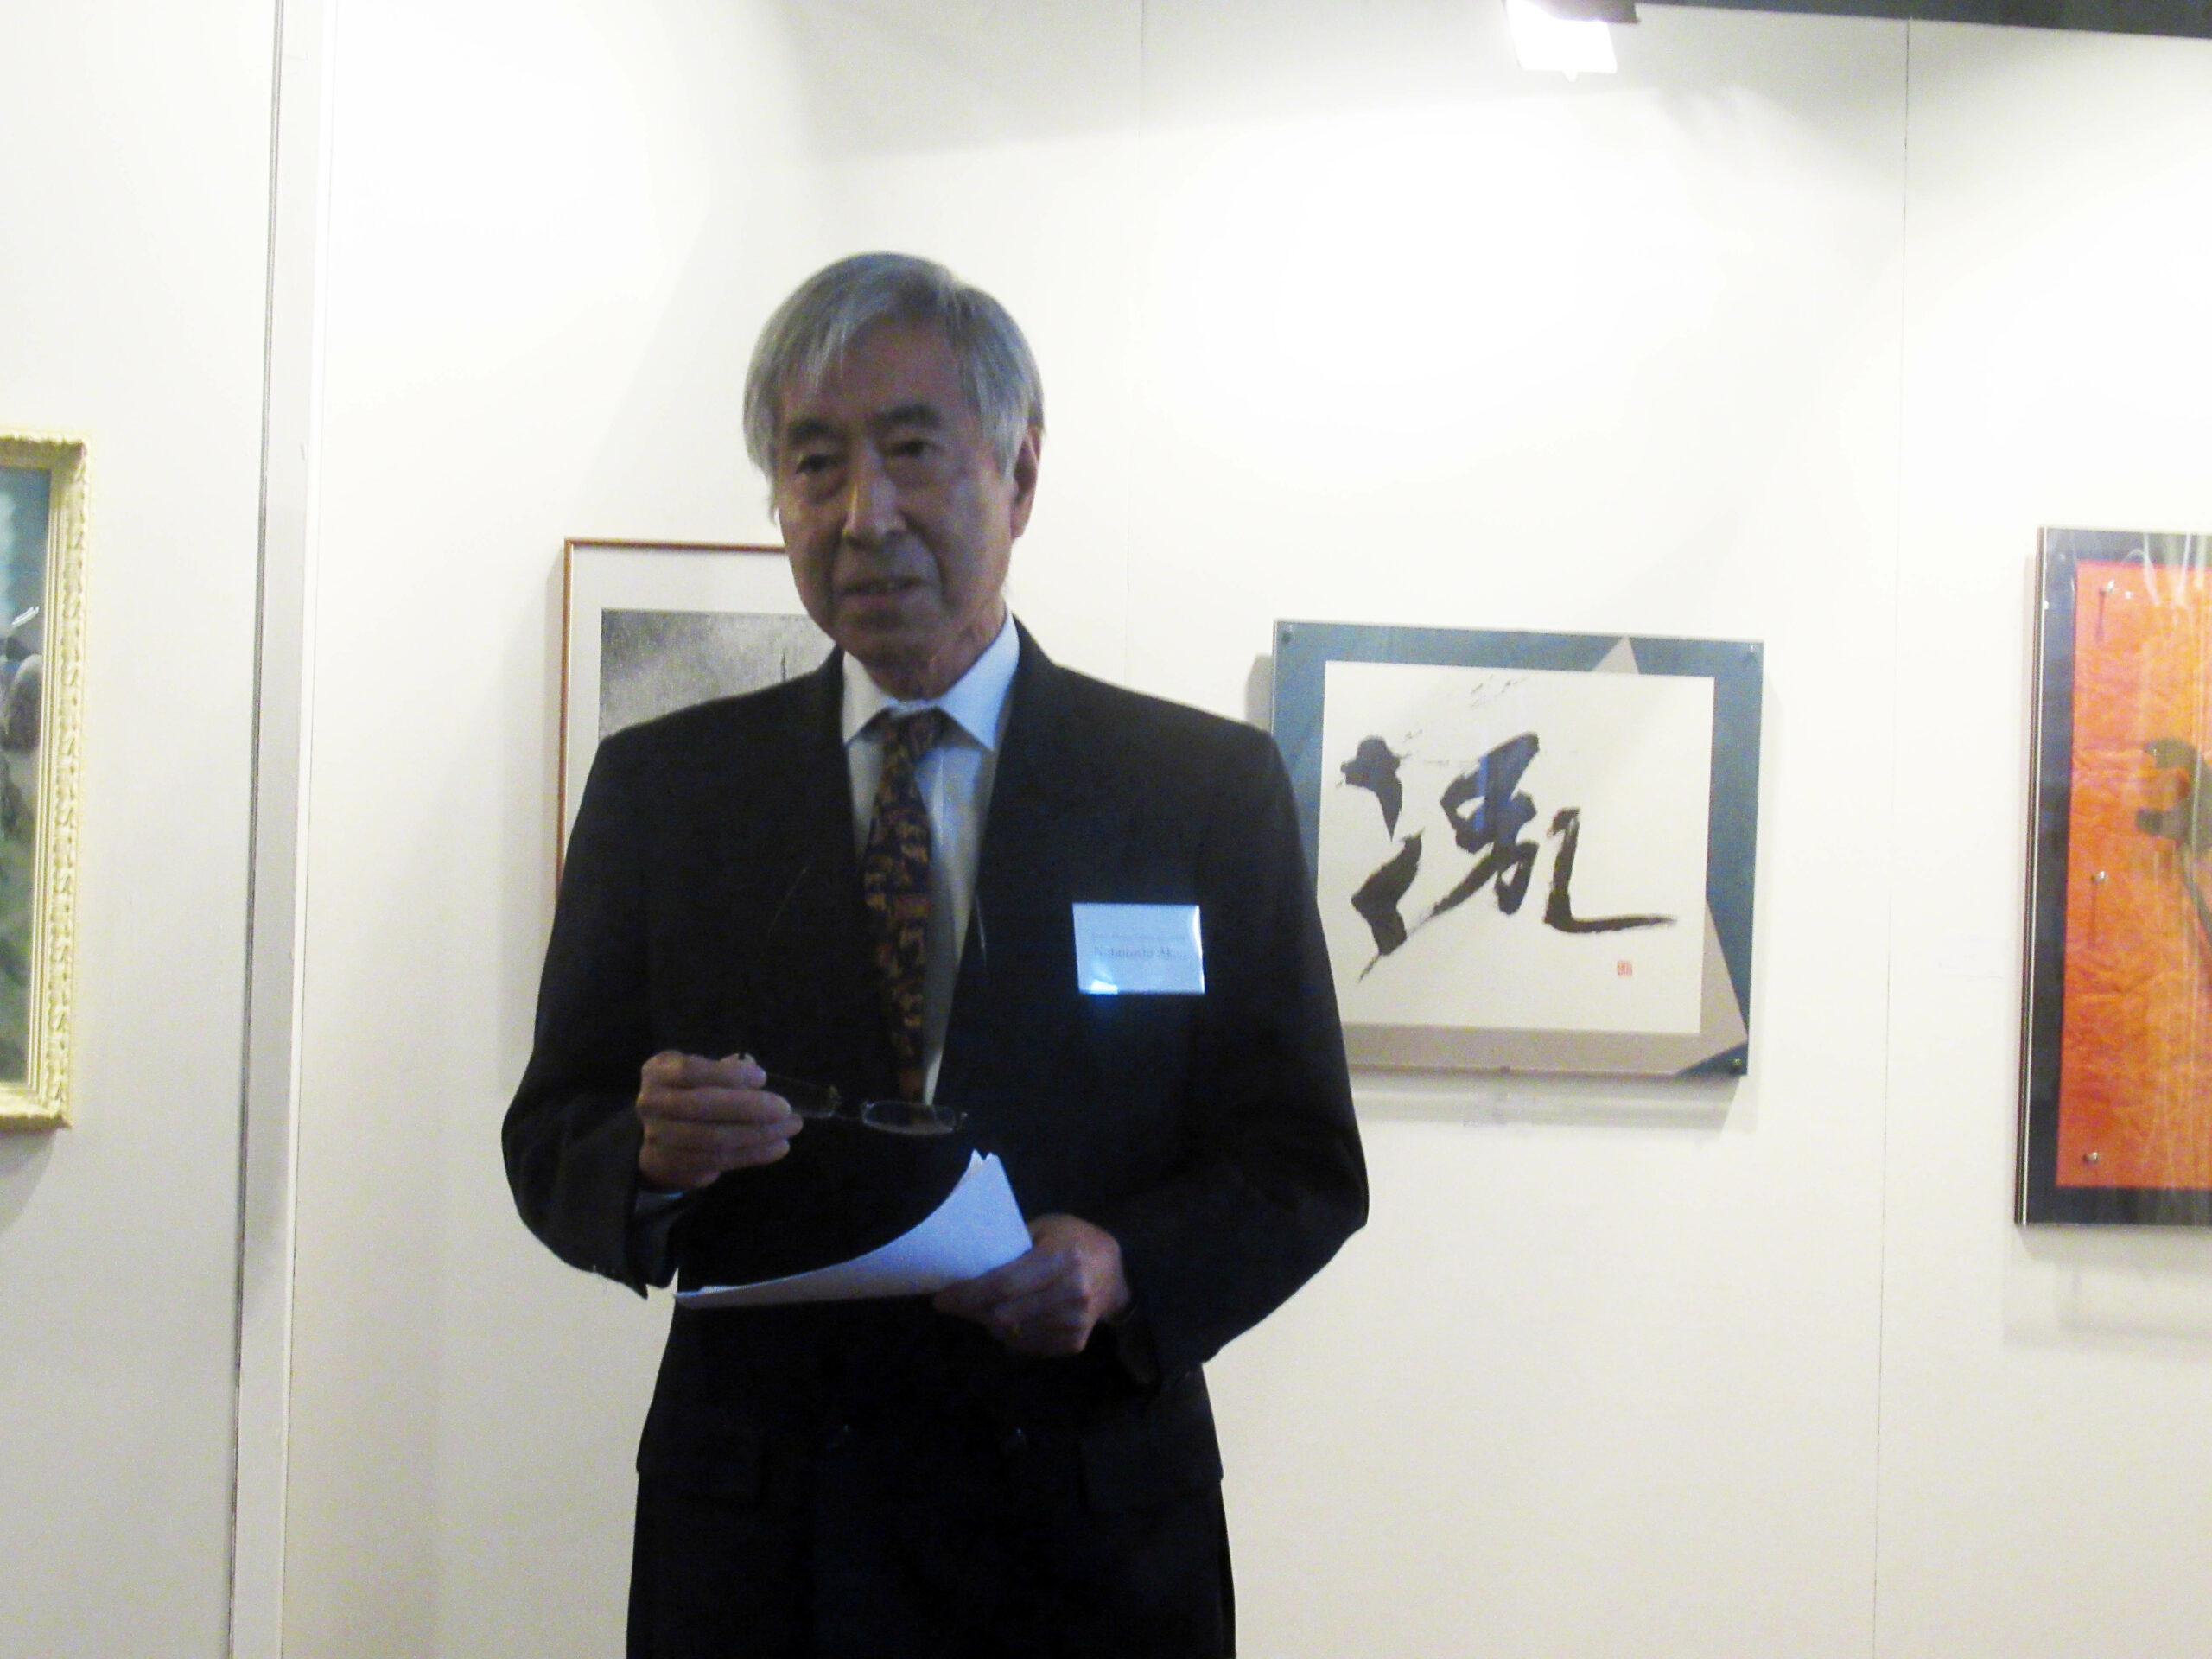 ITALY-JAPAN FRIENDSHIP ART FESTIVAL, WITH THE COMMEMORATIVE EXHIBITION OF ARTWORKS DONATED TO THE CITY OF BOLOGNA